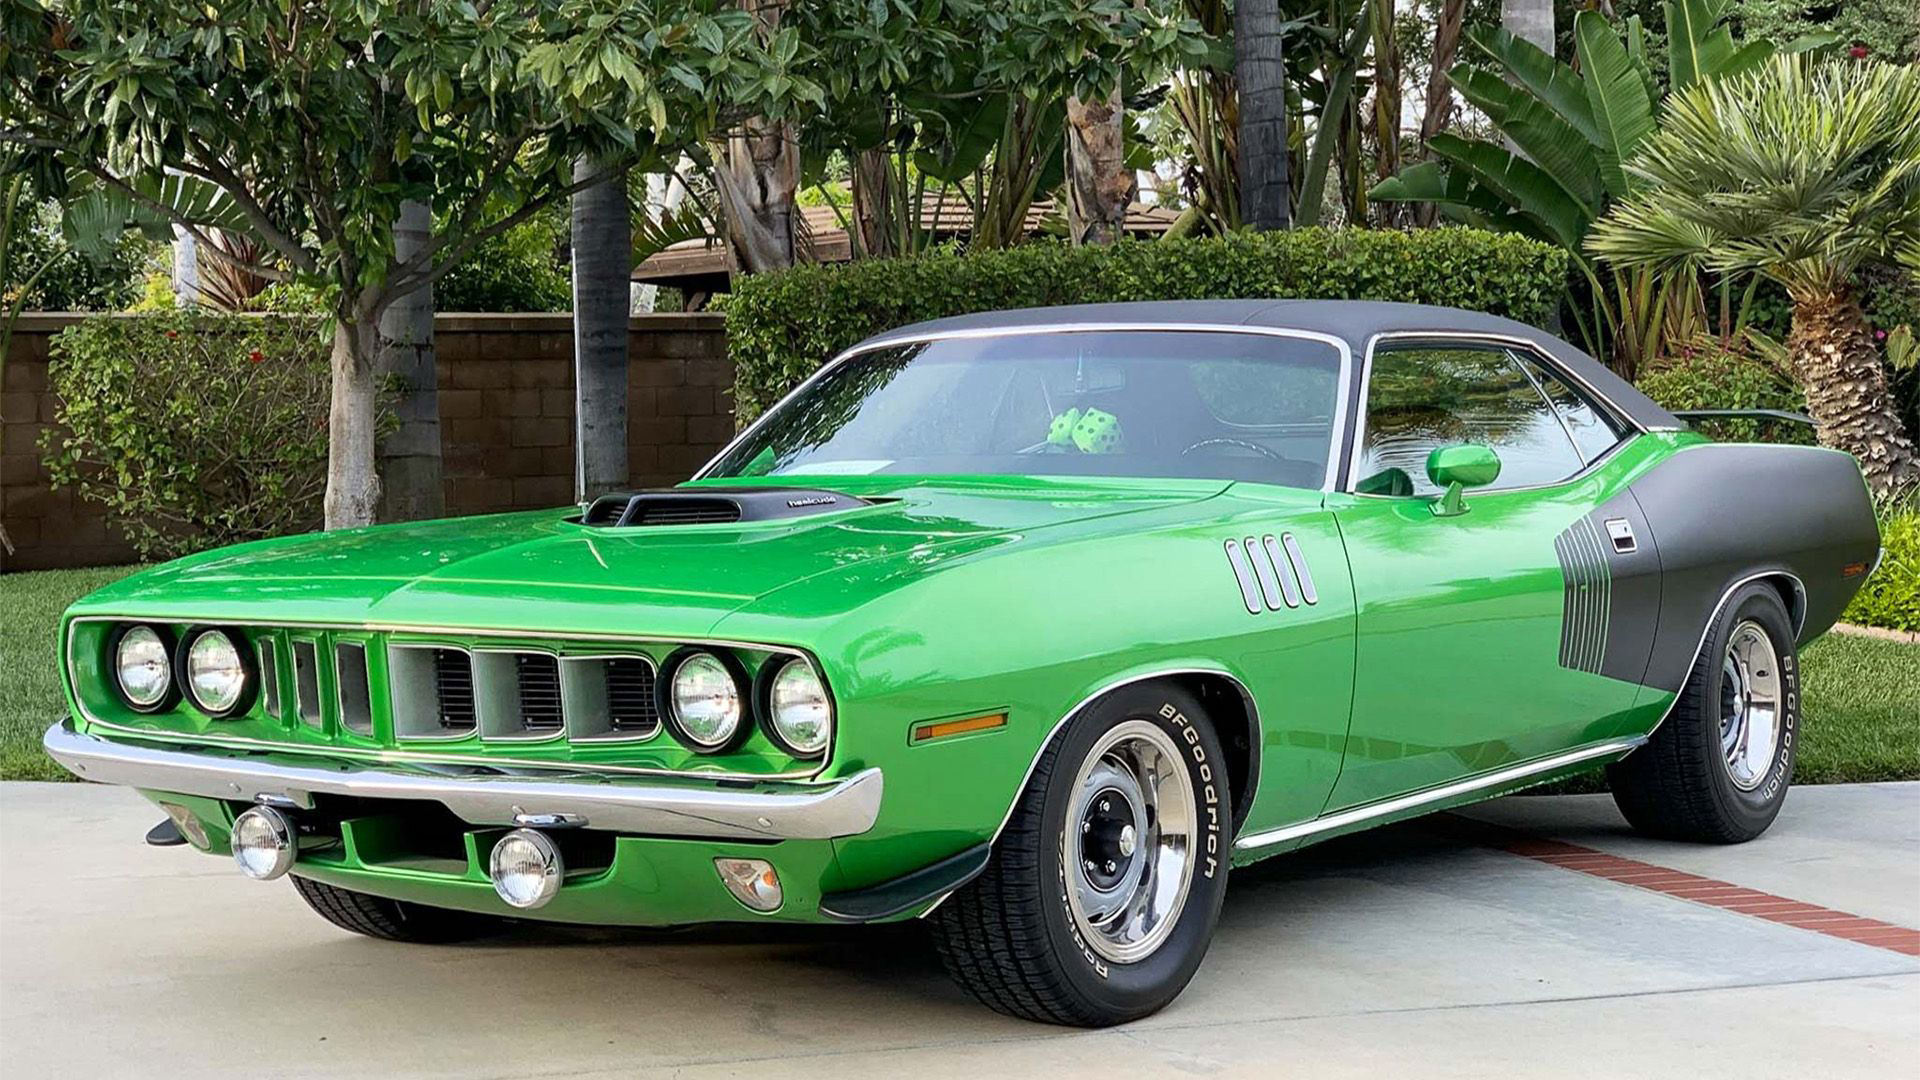 The 10 Best Muscle Cars From The 1970s, Ranked